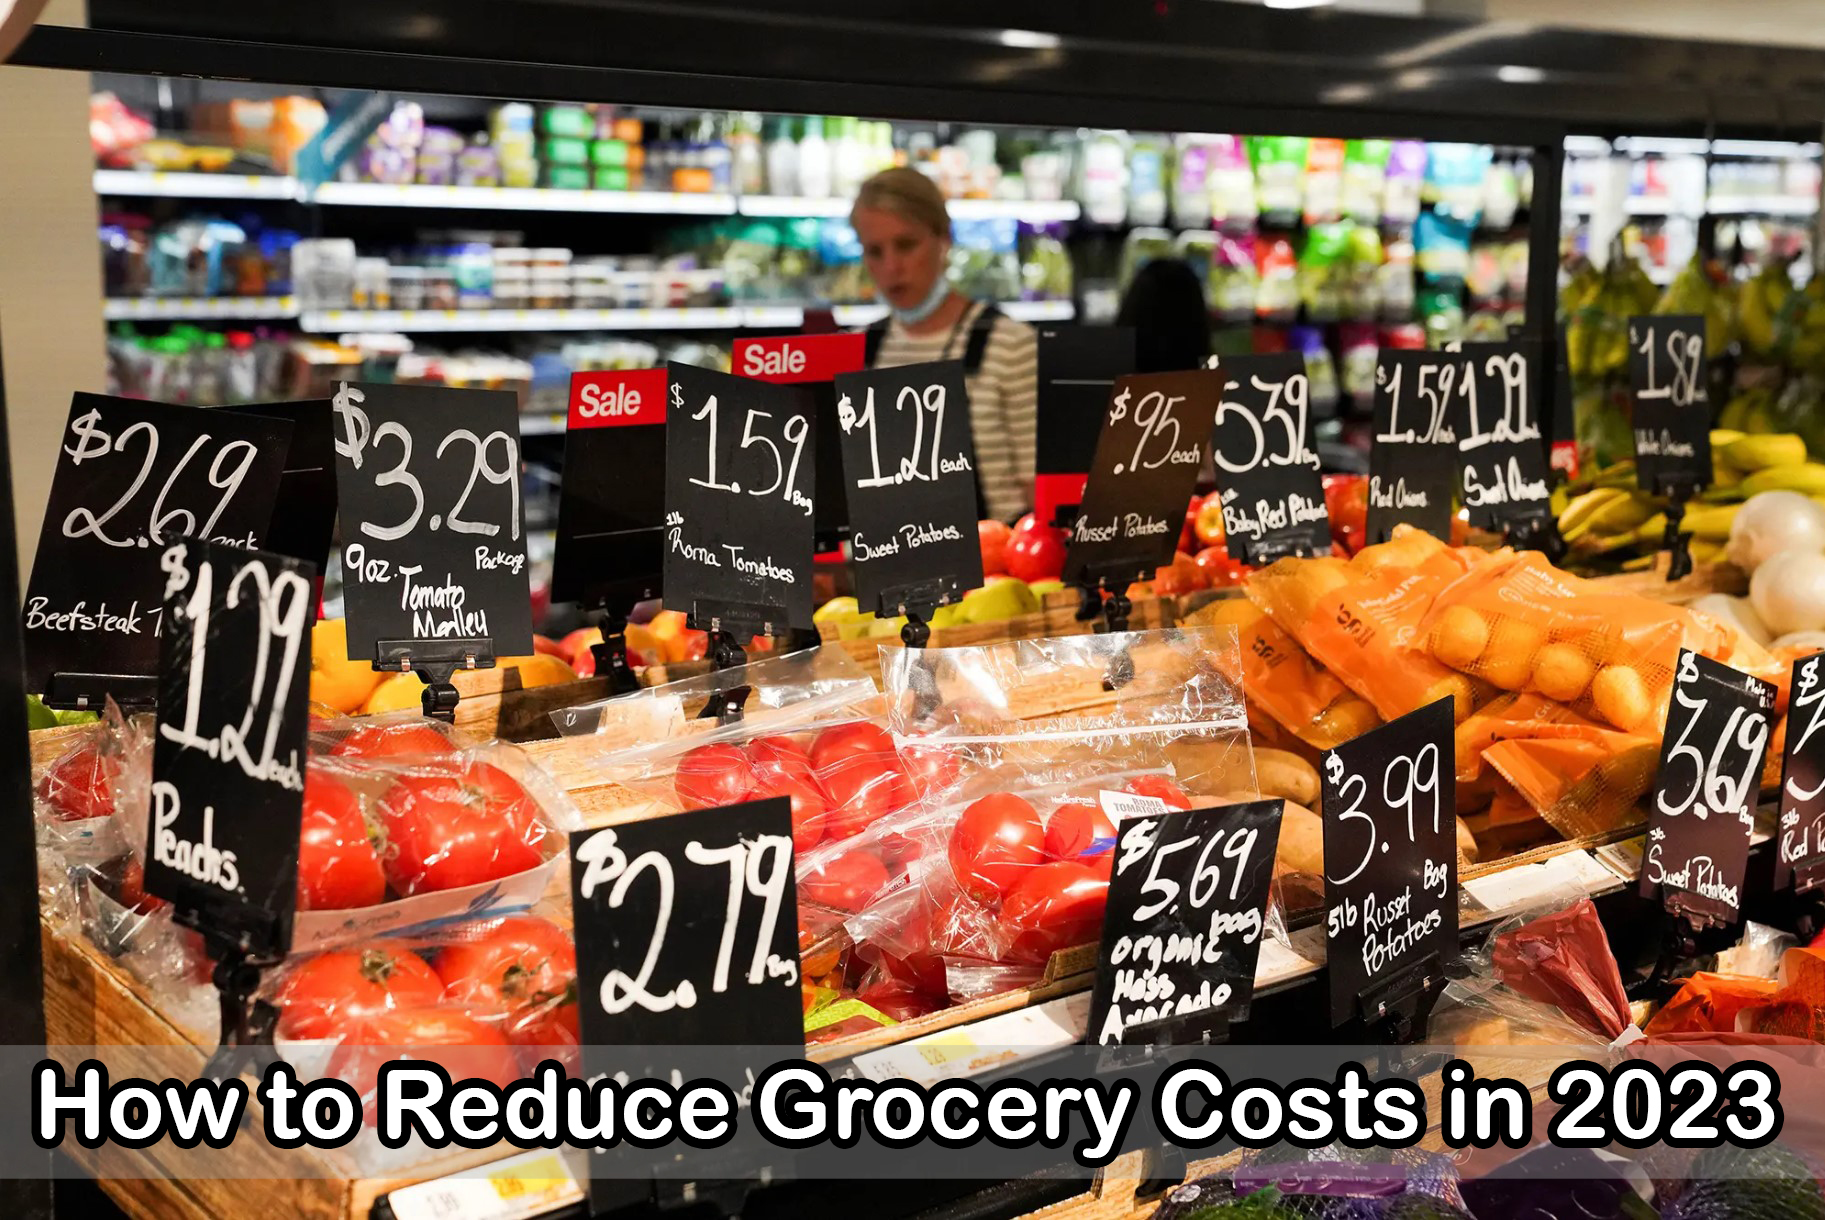 How to Reduce Grocery Costs in 2023